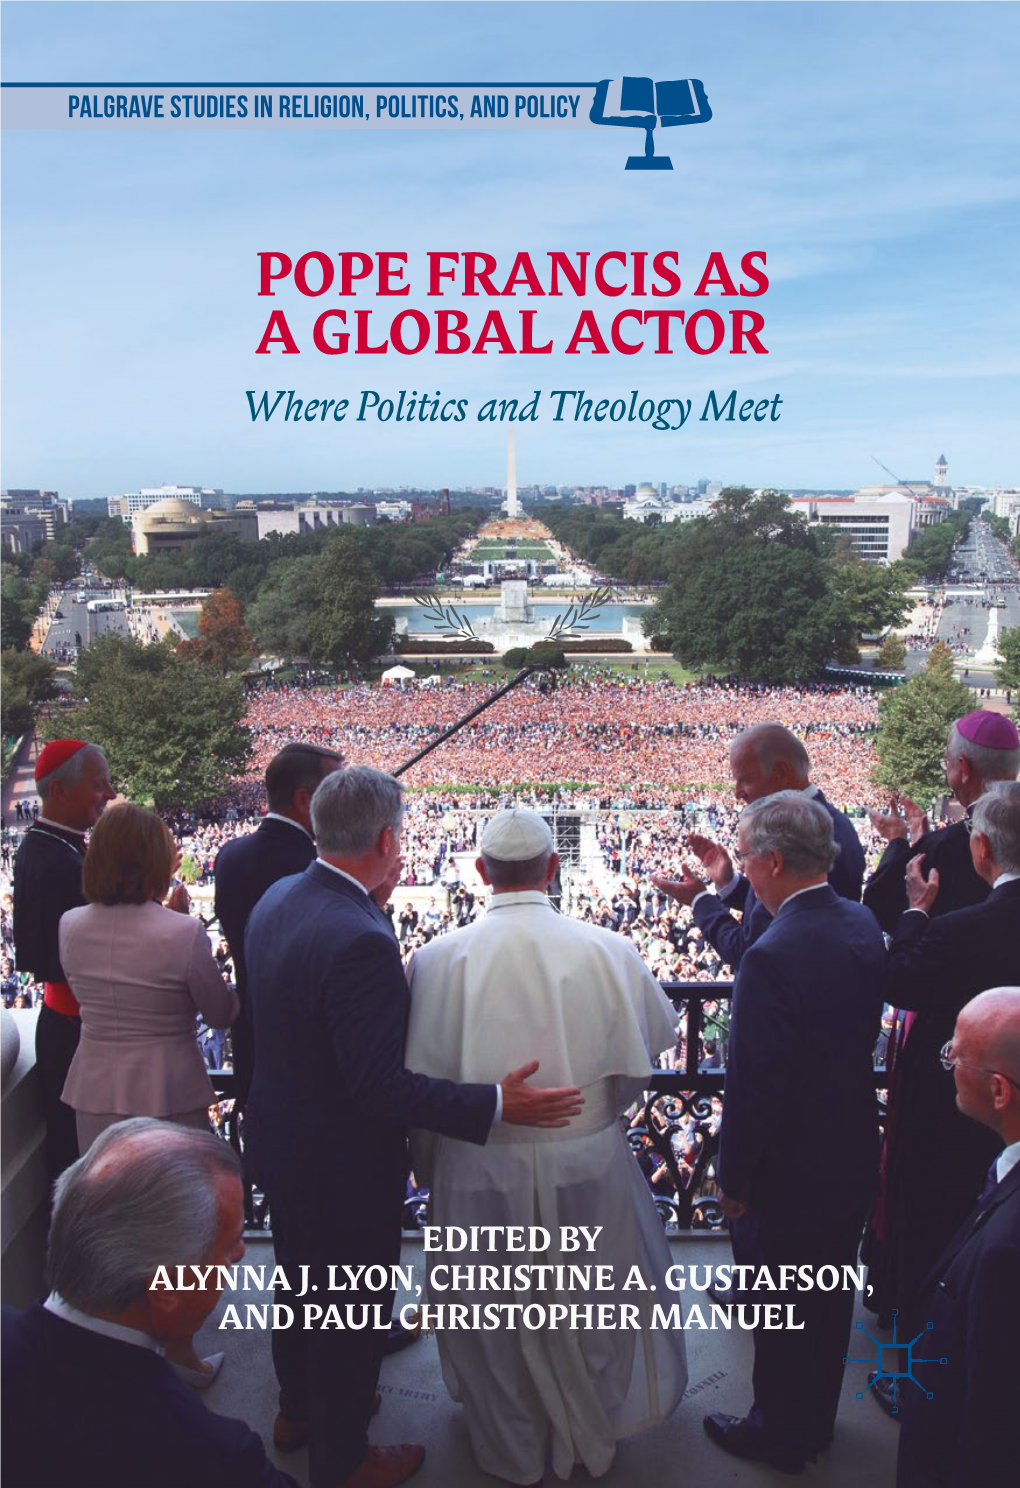 POPE FRANCIS AS a GLOBAL ACTOR Where Politics and Theology Meet